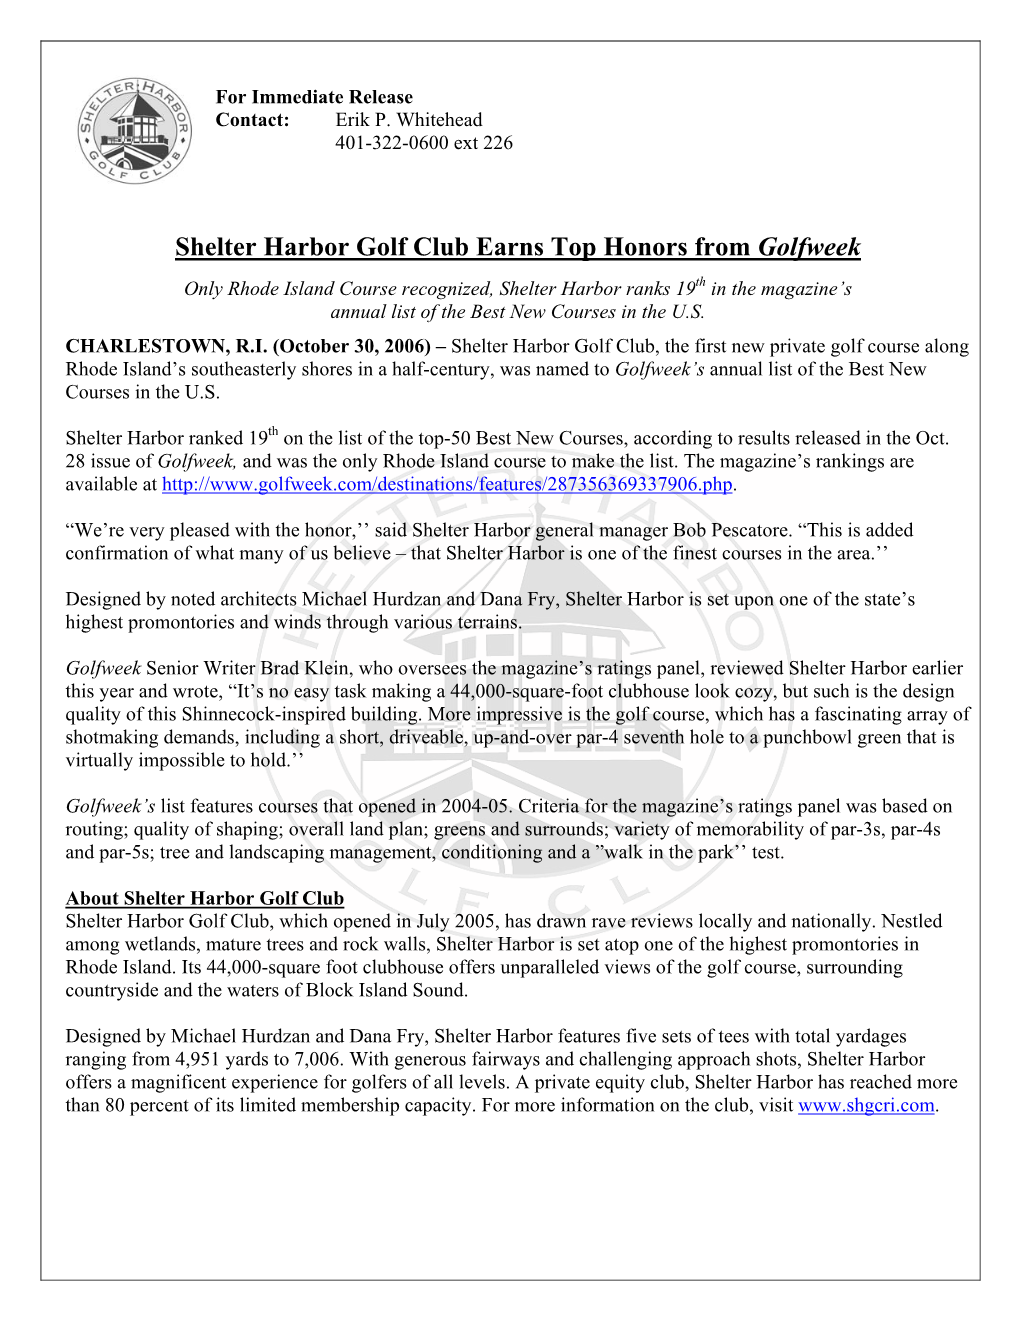 Shelter Harbor Golf Club Earns Top Honors from Golfweek